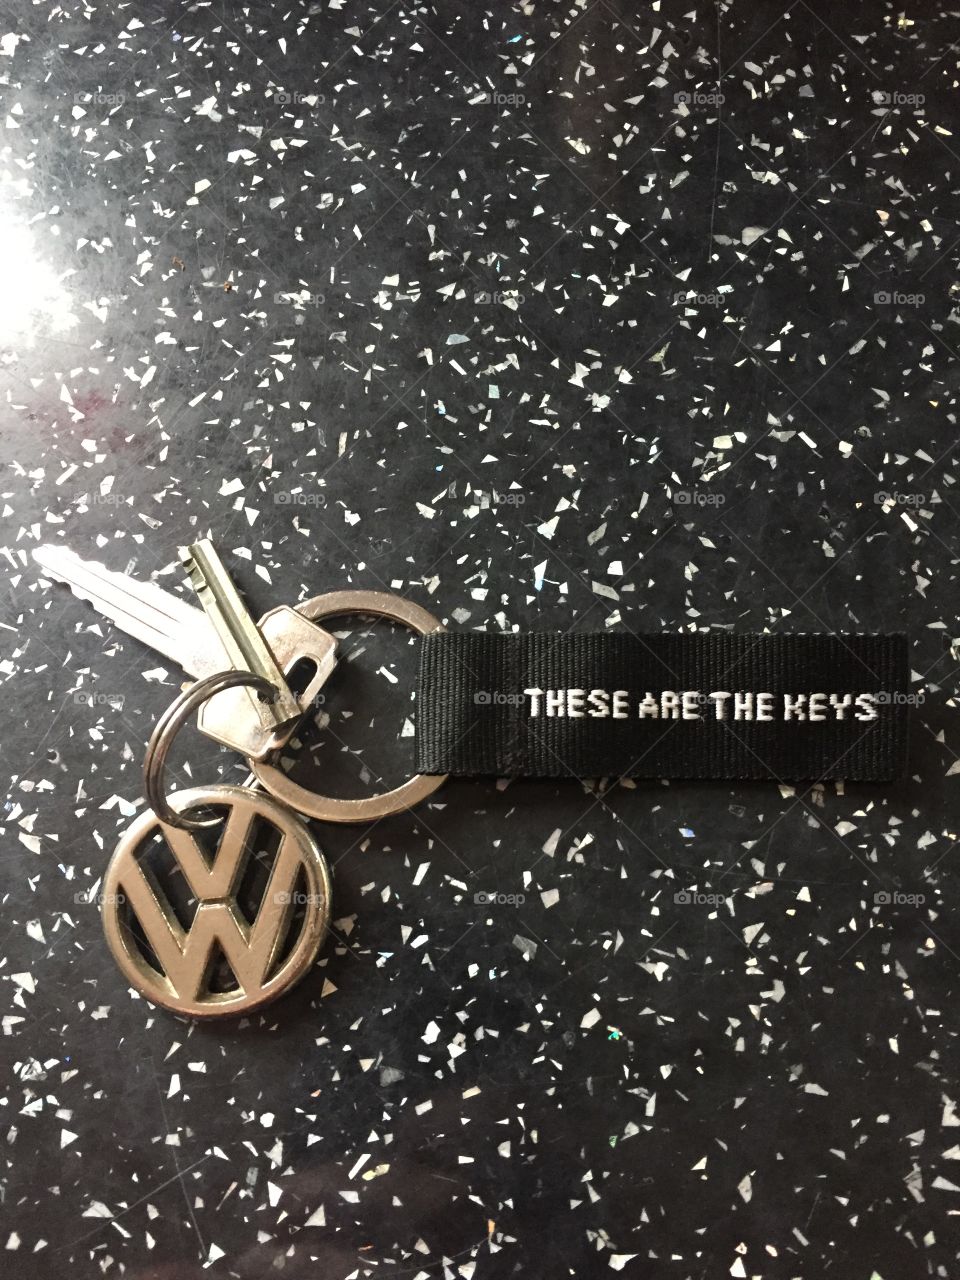 These are the keys VW